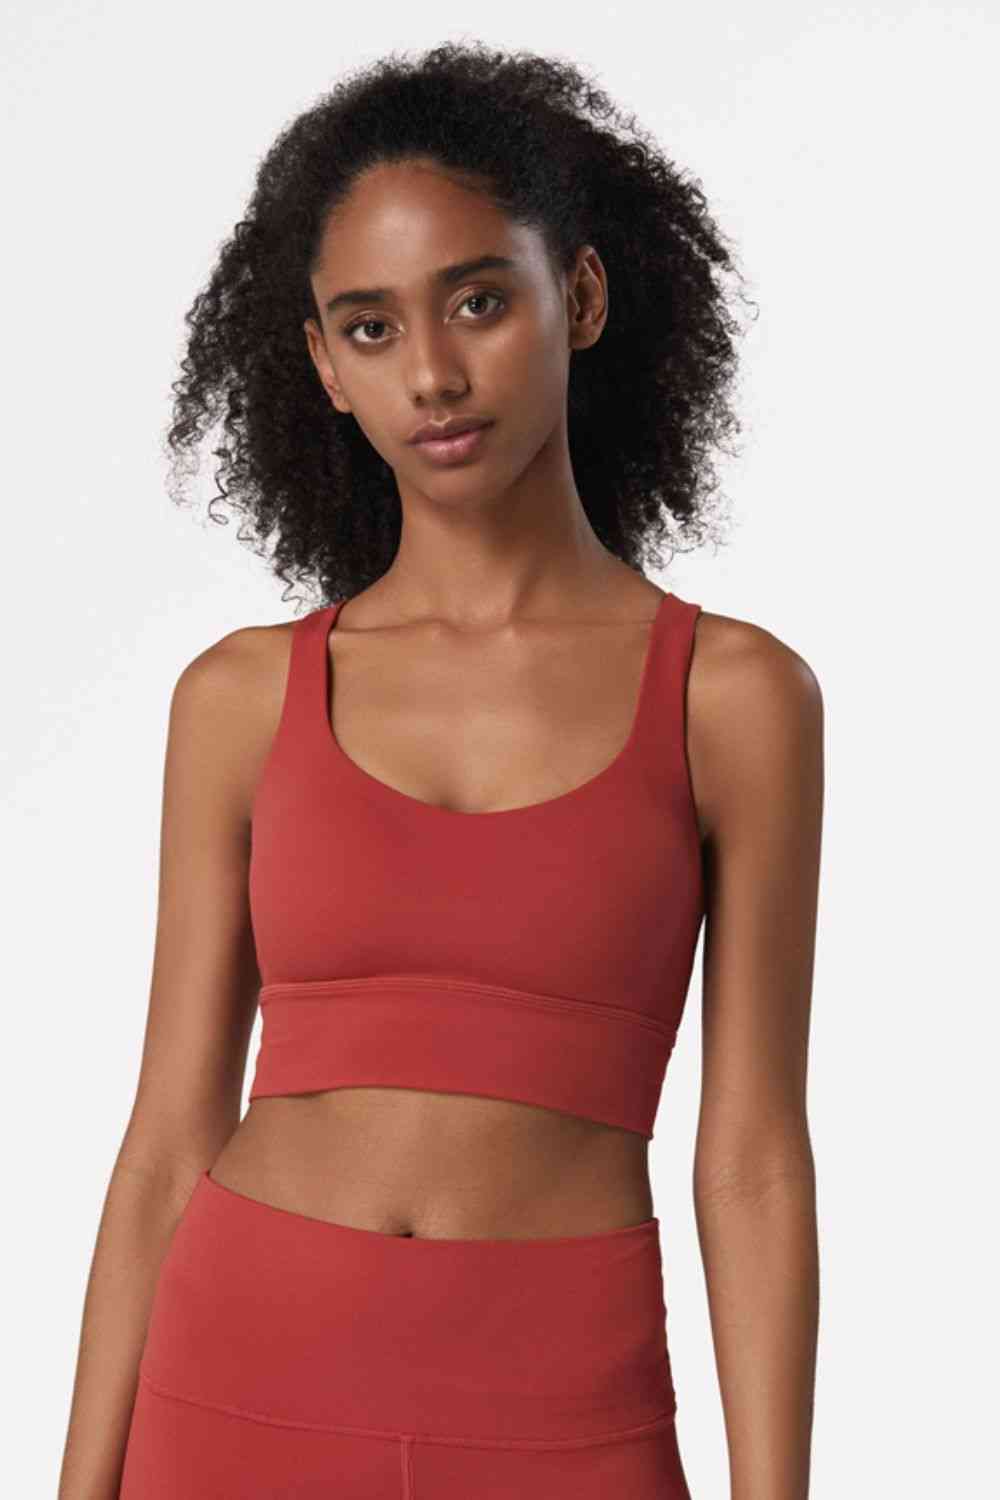 Tropic Pacific All You Could Want Sports Bra